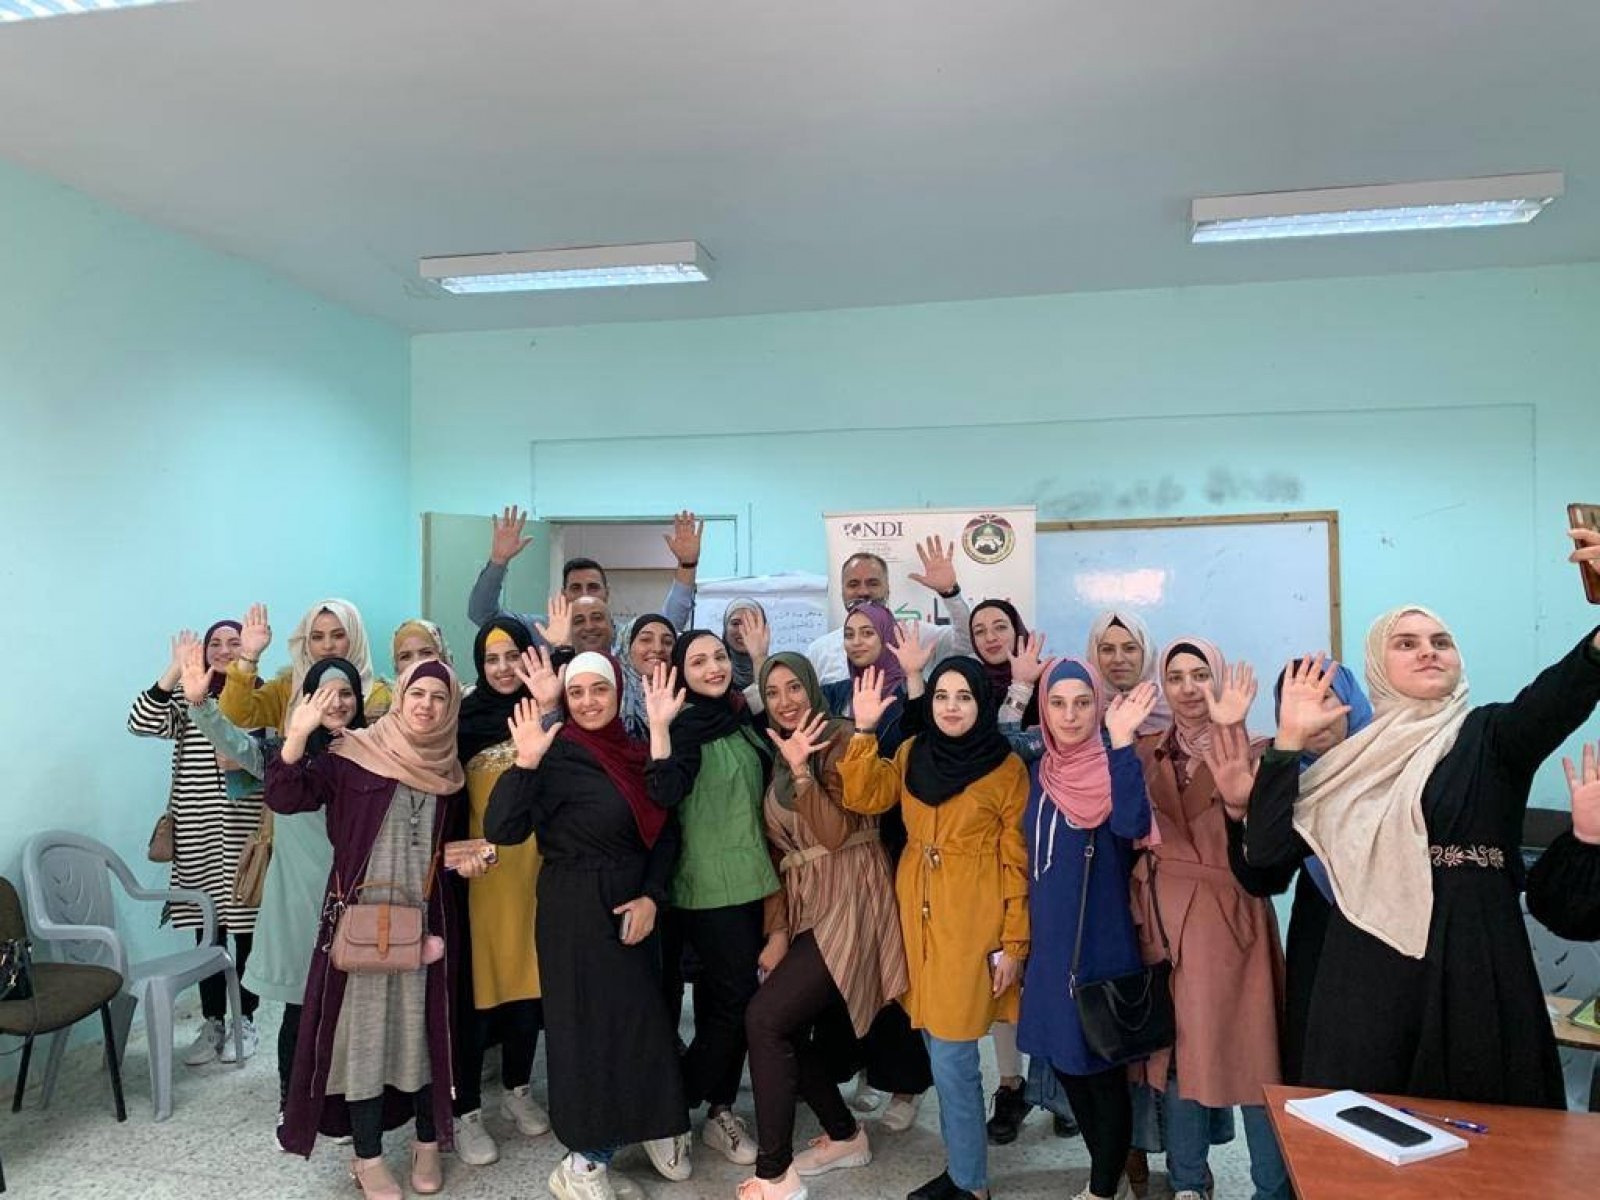 Palestinian Youth Advocate for Change during COVID-19